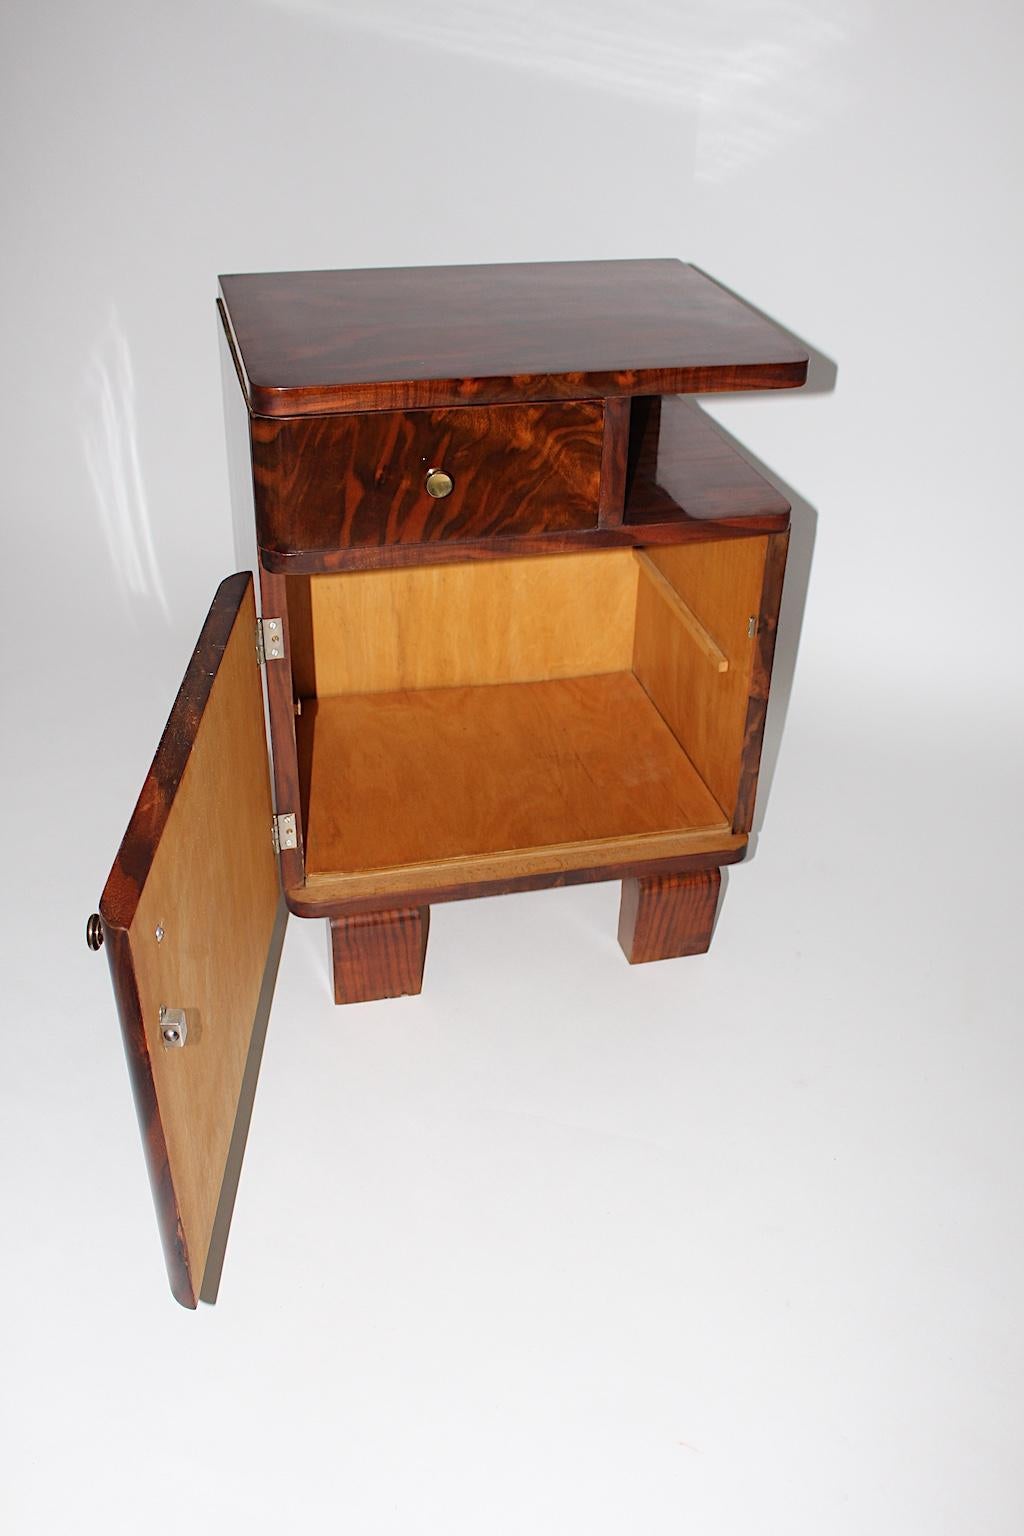 Mid-20th Century Art Deco Vintage Walnut Brass Small Chest or Nightstand, Austria, 1930s For Sale